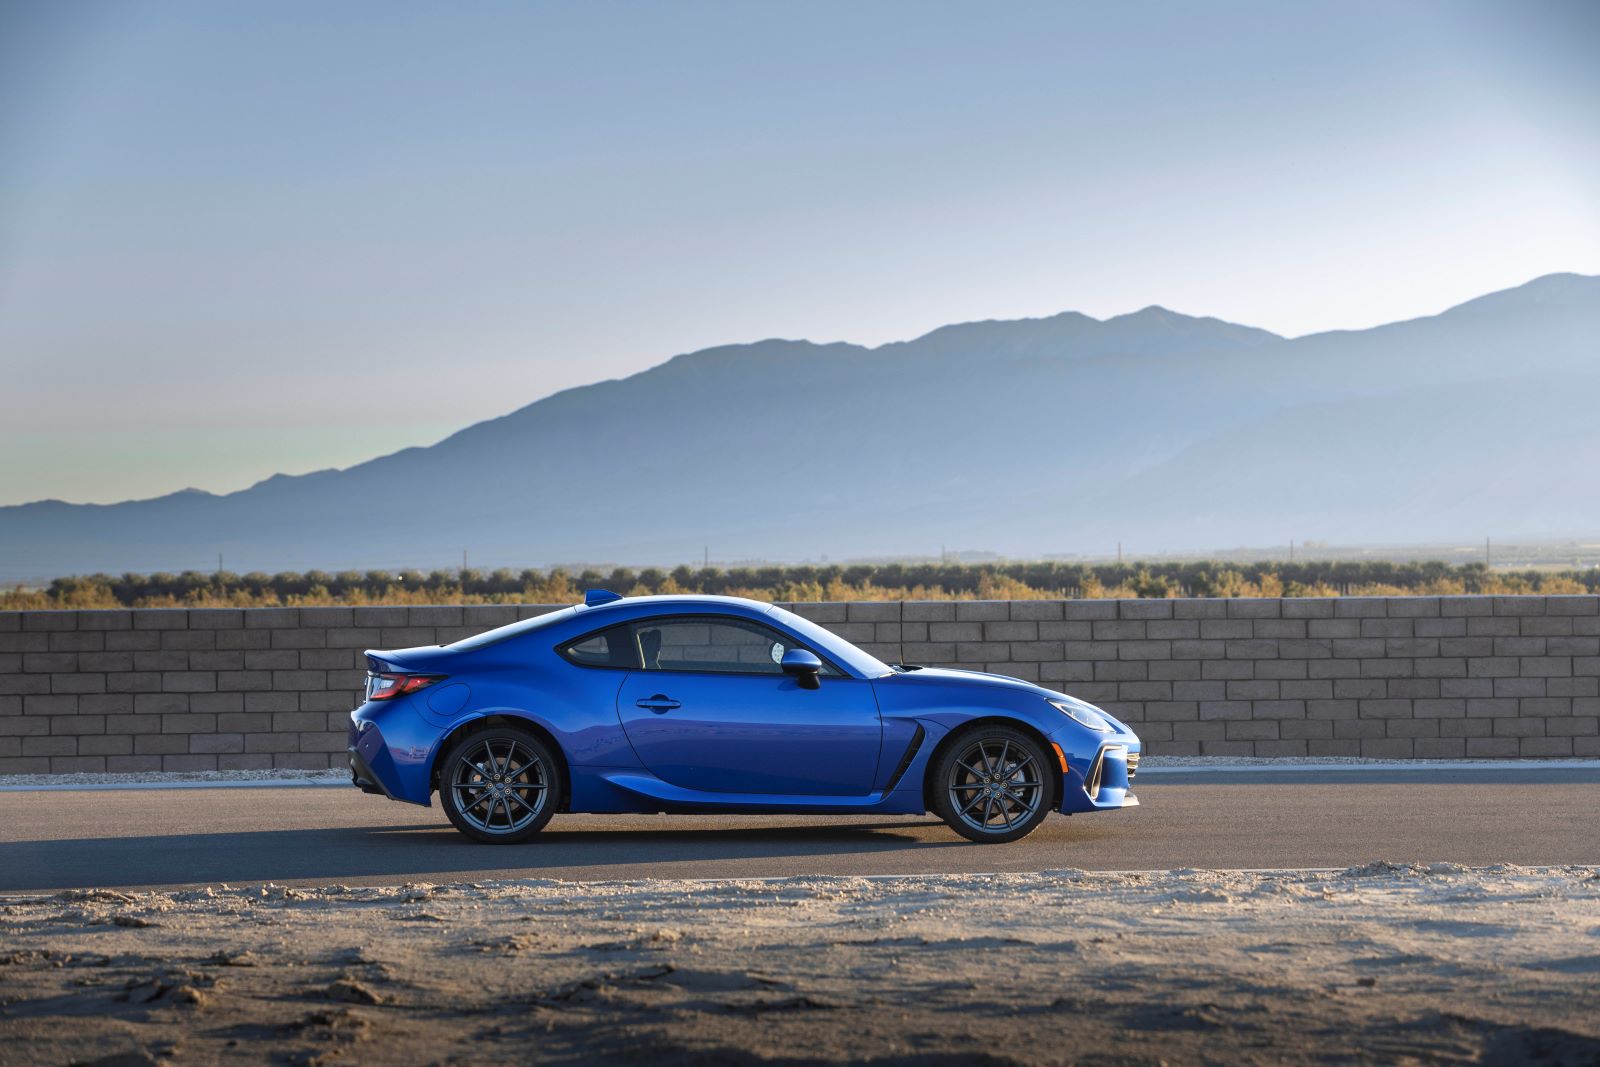 Side profile of a blue 2022 Subaru BRZ coupe, trim level uncertain, parked on a road against the backdrop of sprawling mountains